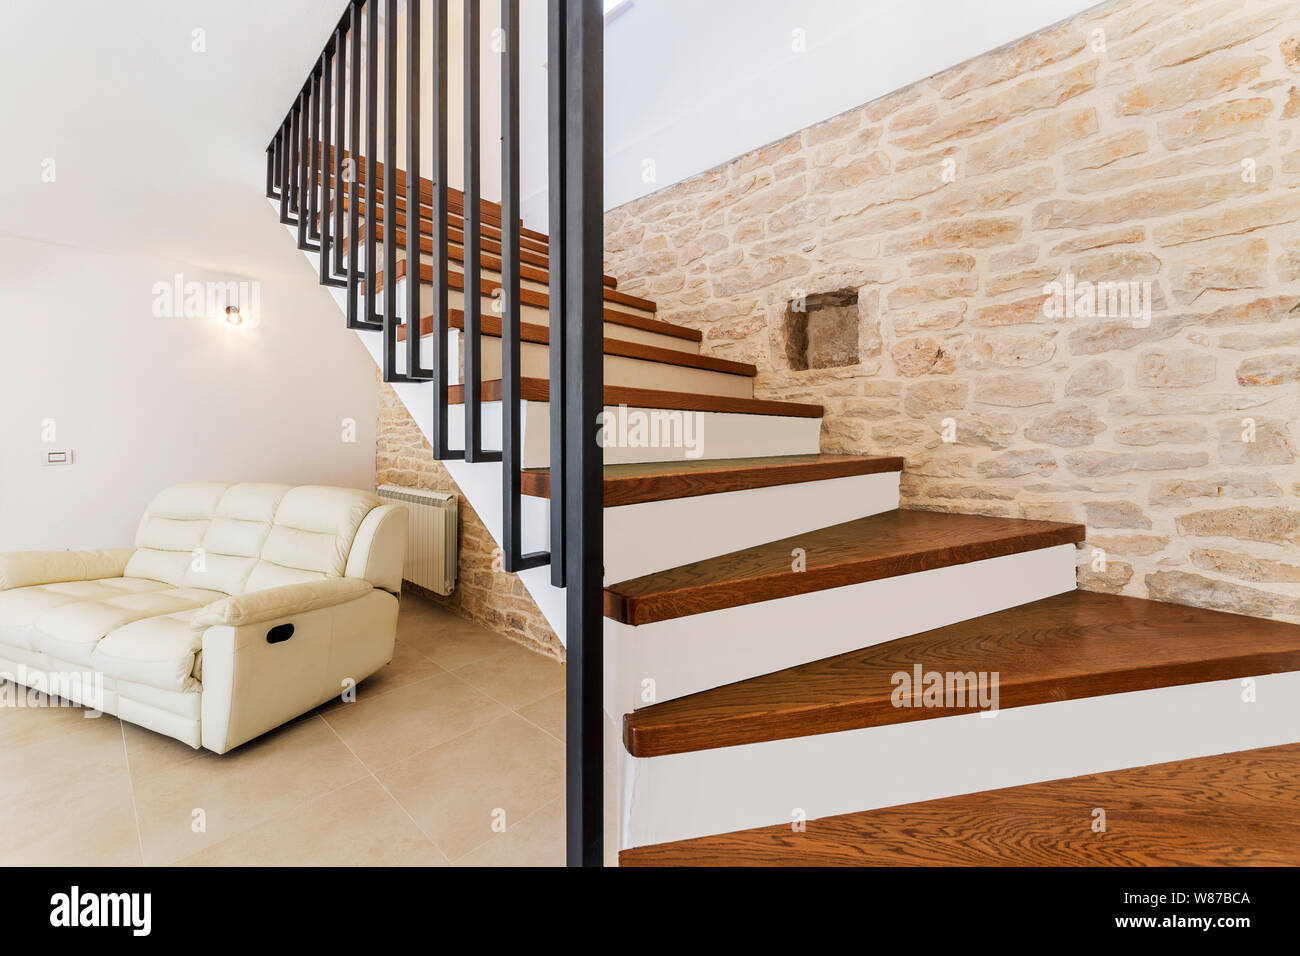 living room interior with wooden stairway Stock Photo